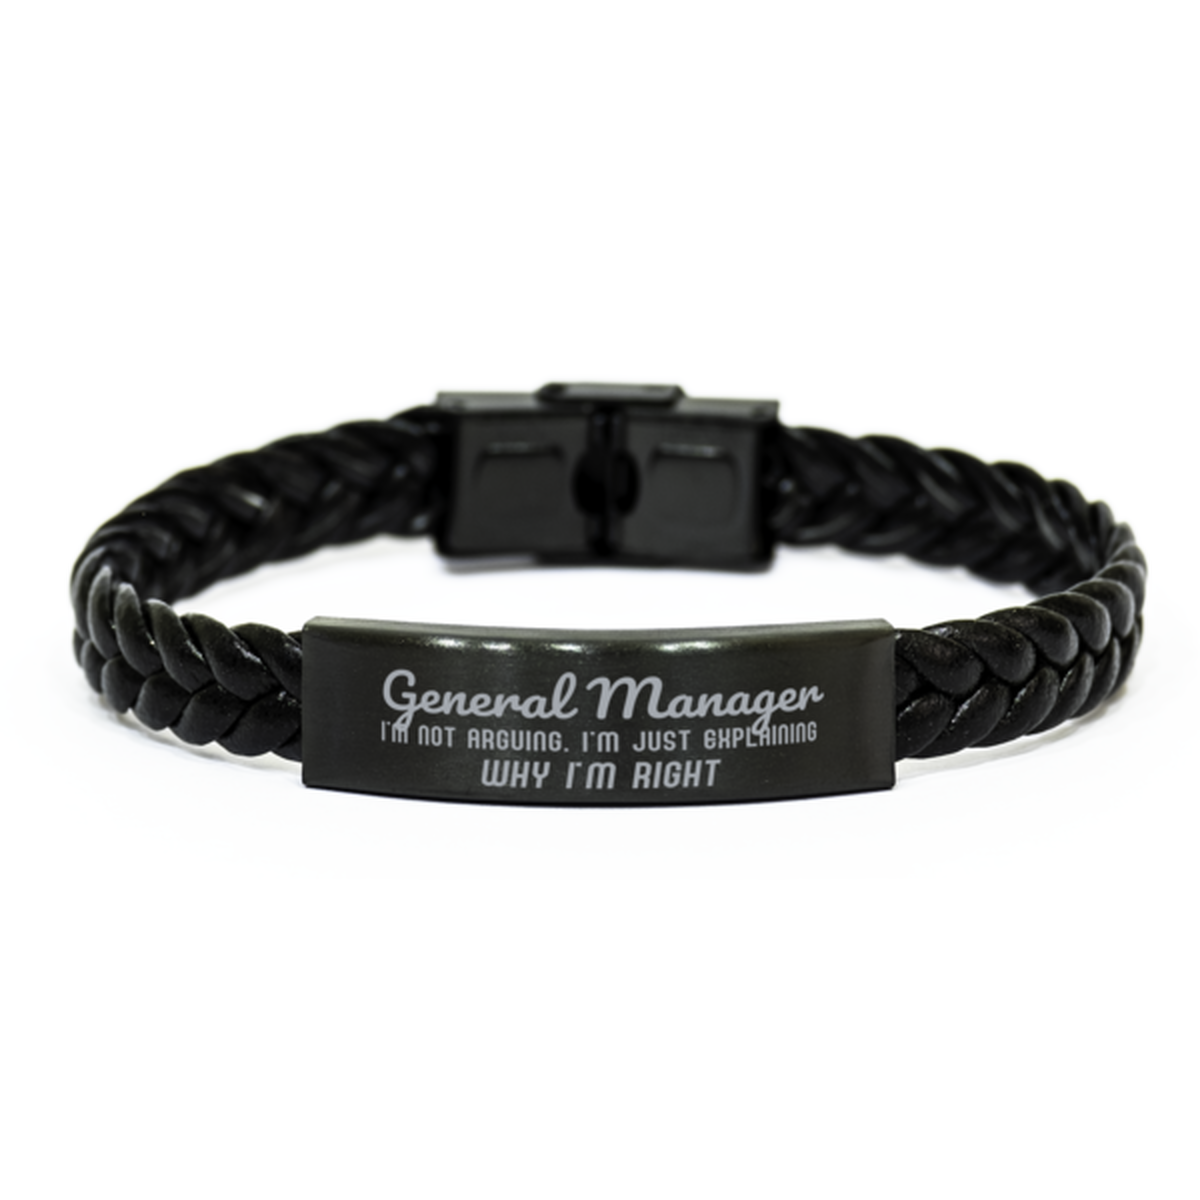 General Manager I'm not Arguing. I'm Just Explaining Why I'm RIGHT Braided Leather Bracelet, Graduation Birthday Christmas General Manager Gifts For General Manager Funny Saying Quote Present for Men Women Coworker